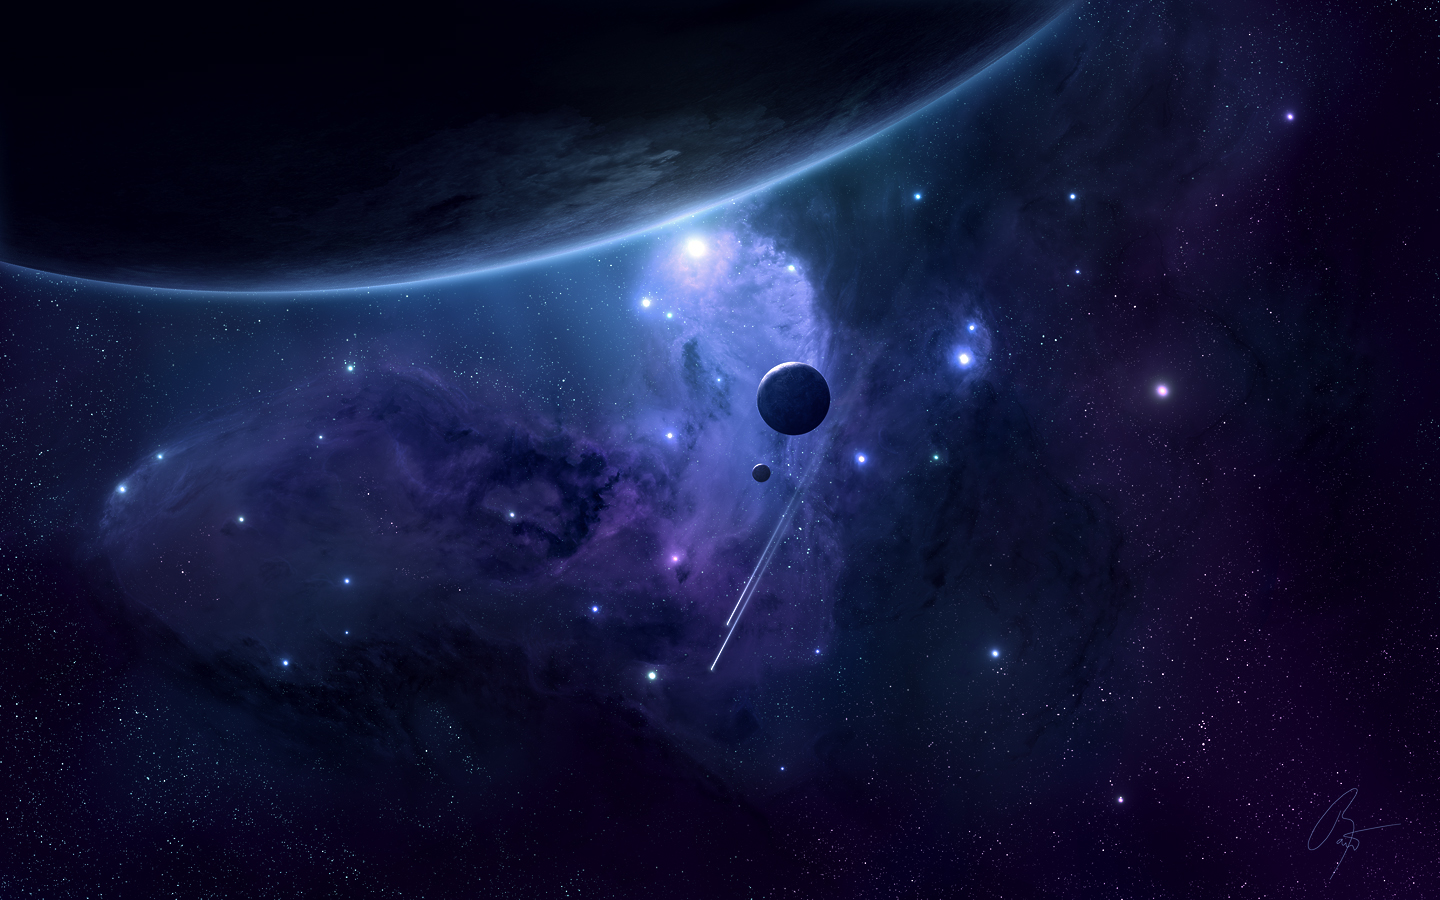 SpaceFantasy Wallpaper Set 41 Awesome Wallpapers